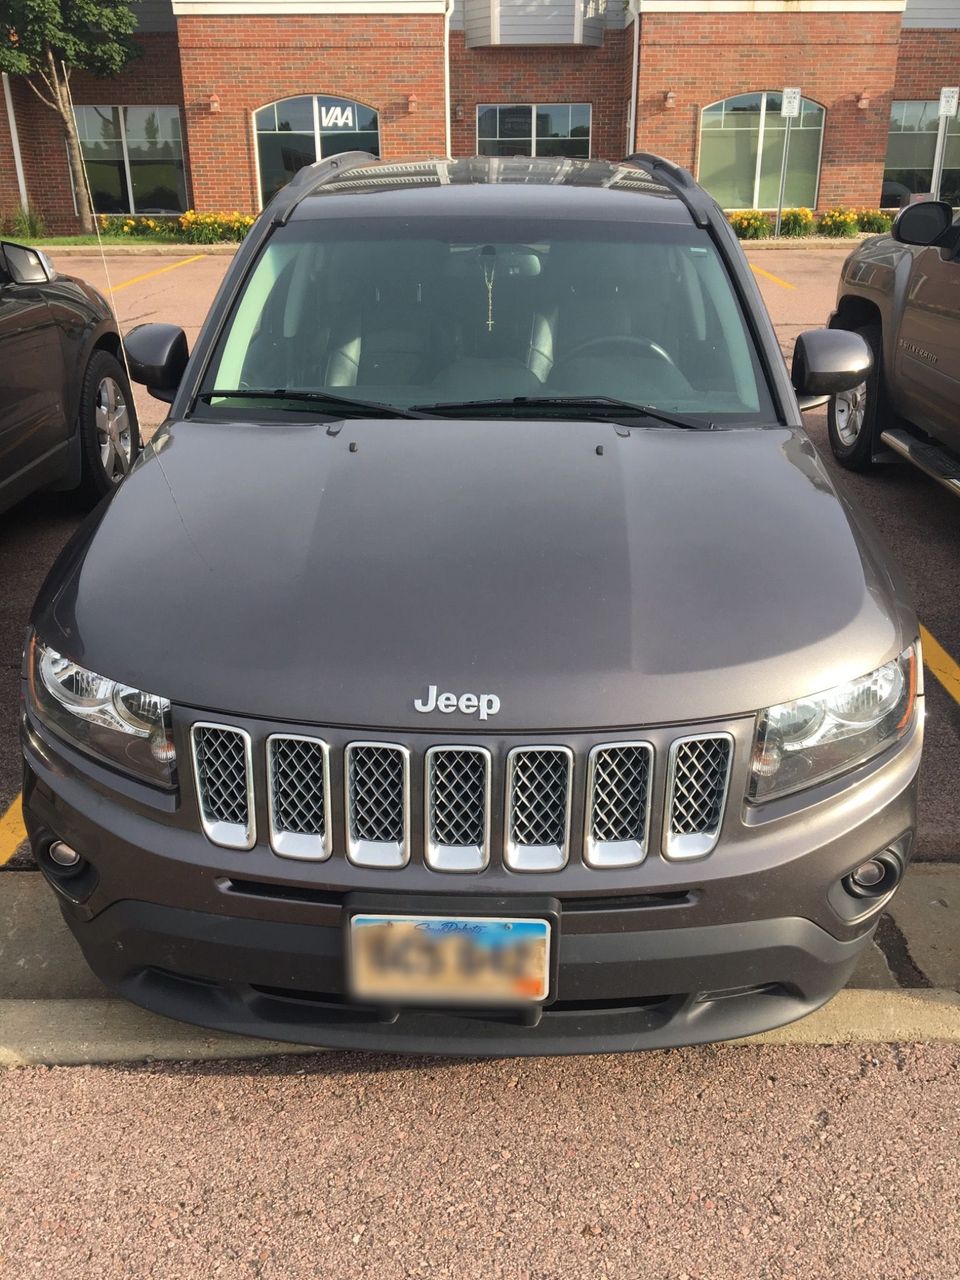 2016 Jeep Compass | Sioux Falls, SD, Billet Silver Metallic Clear Coat (Silver)